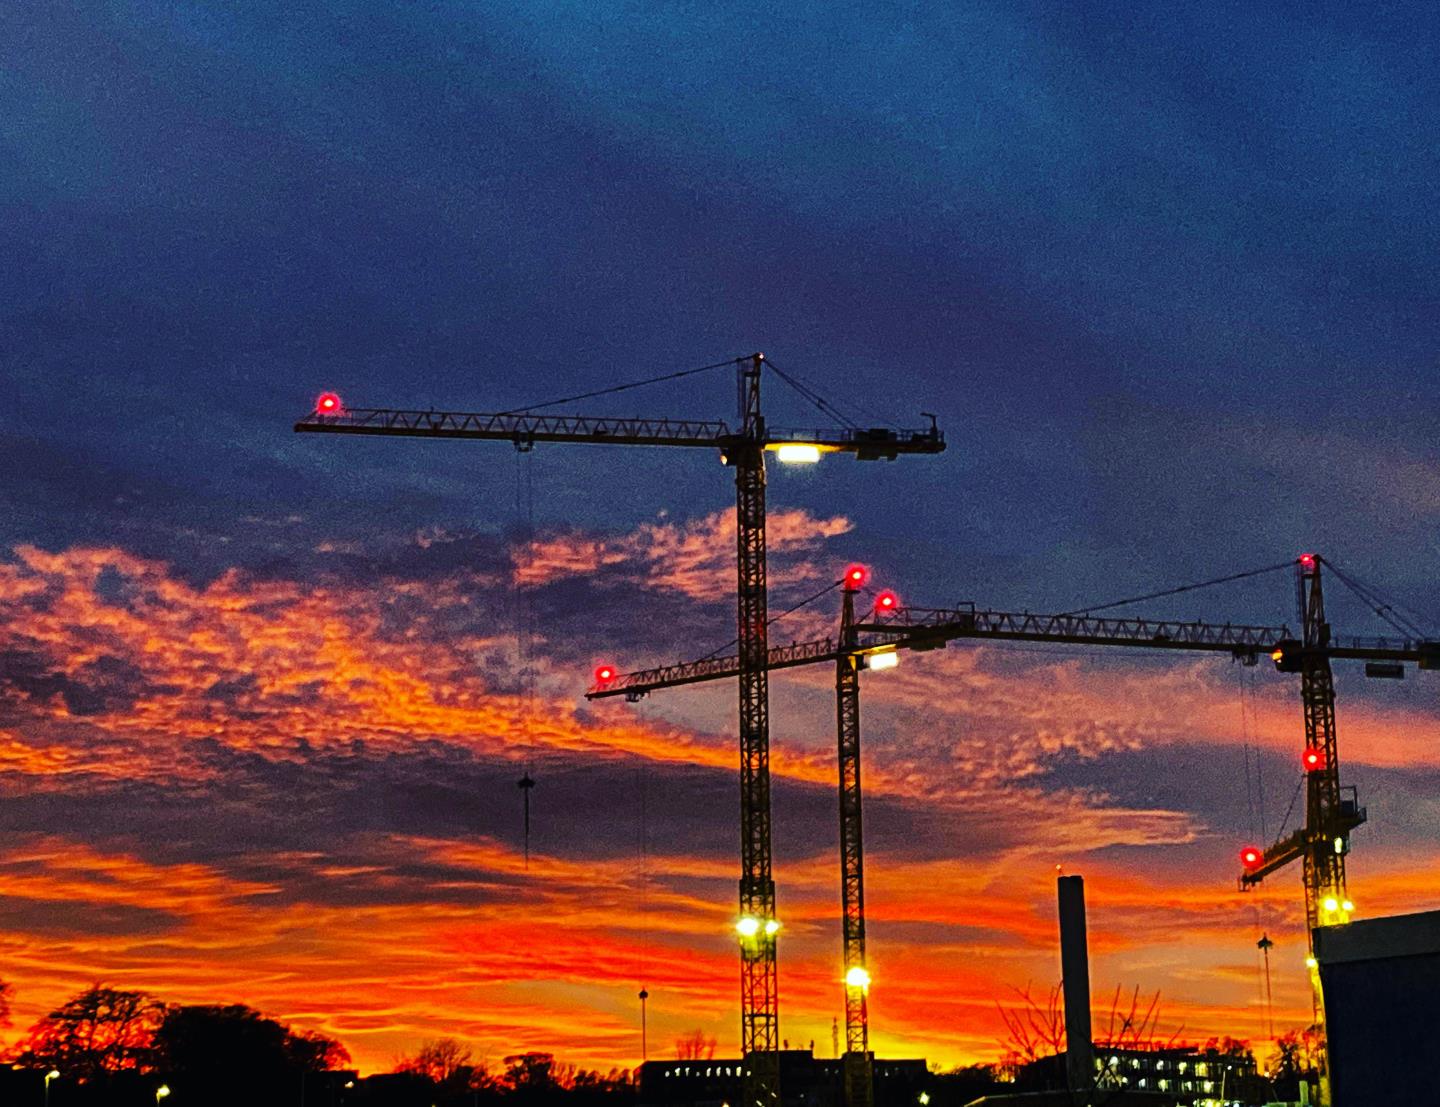 Sunset at Aberdeen Royal Infirmary building site.